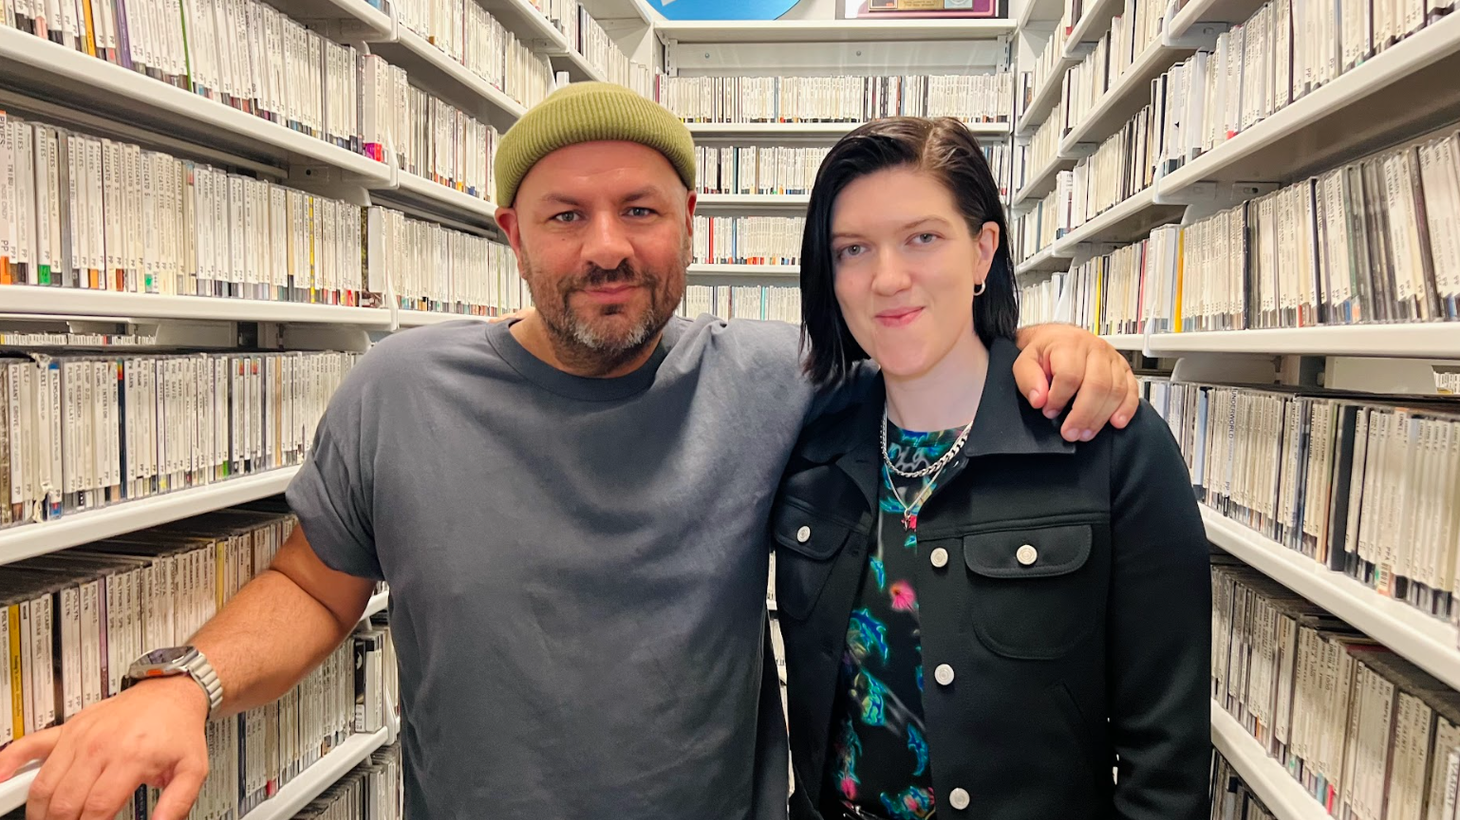 Anthony Valadez and Romy Madley Croft channel their inner music librarians.